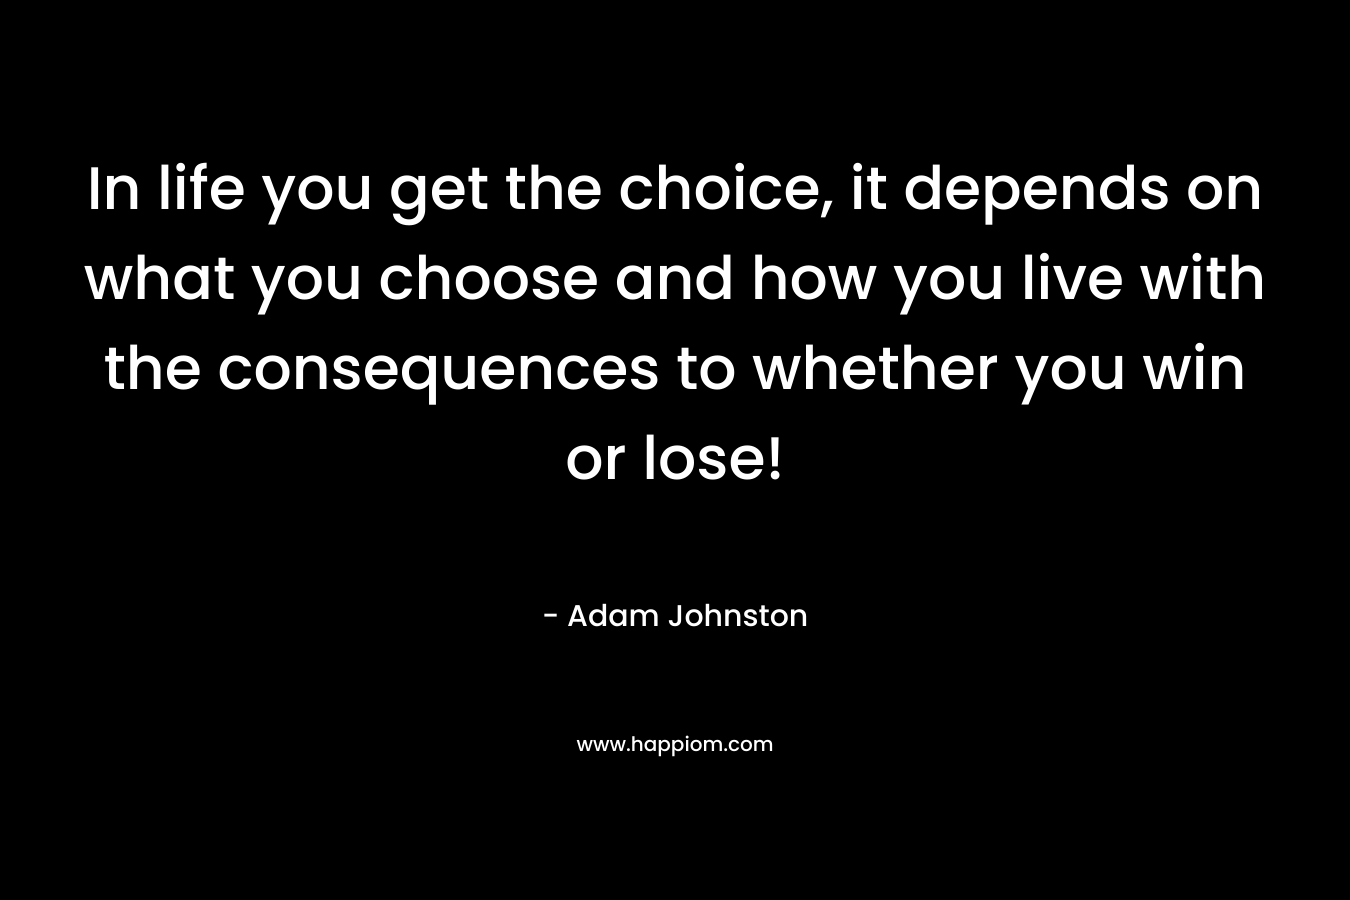 In life you get the choice, it depends on what you choose and how you live with the consequences to whether you win or lose!